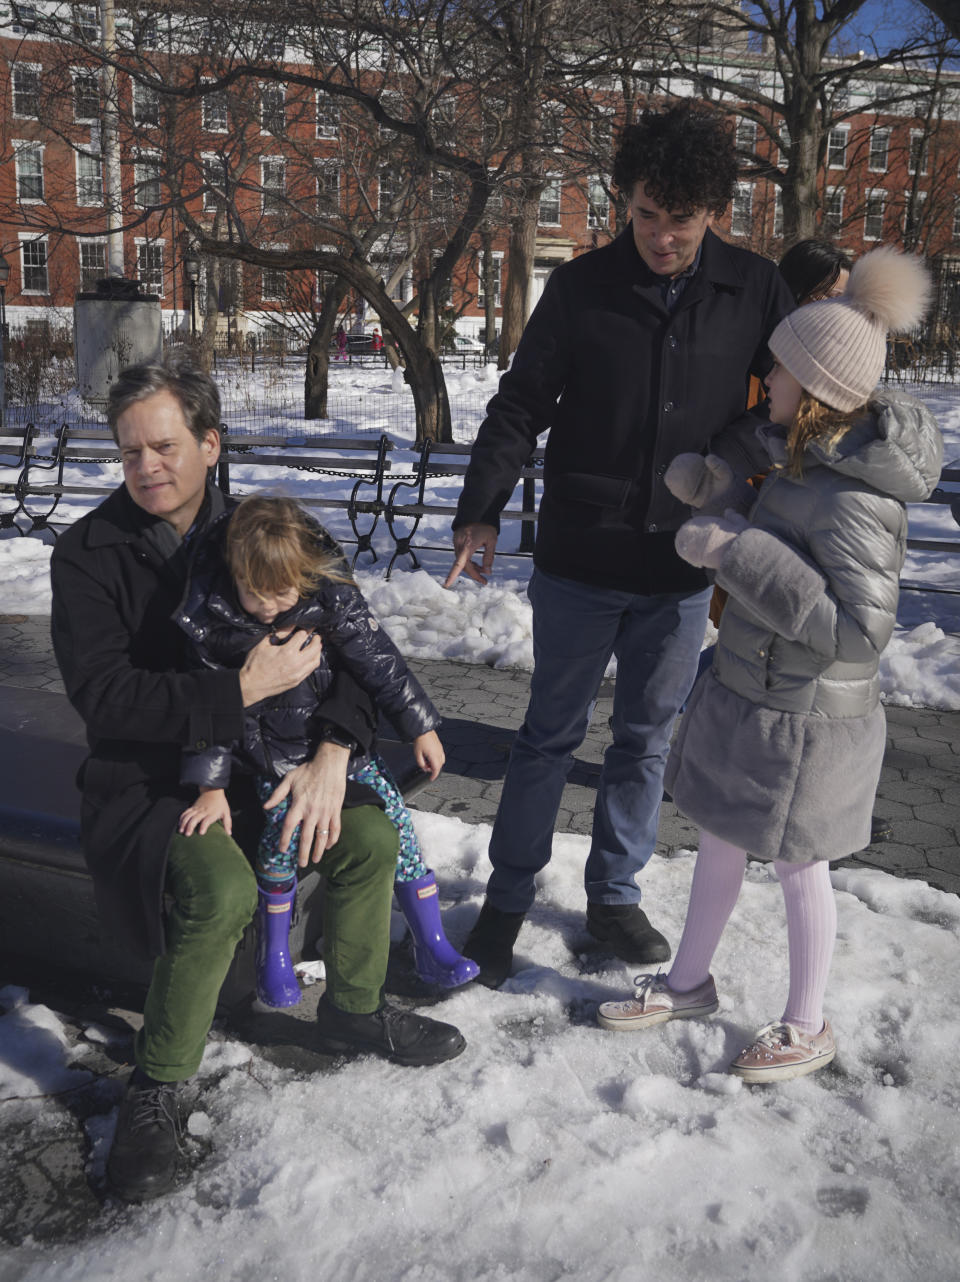 New York State Senator Brad Hoylman, left, with his husband David Sigal, right, with their daughters Lucy Hoylman-Sigal, 3, left, and Silvia Hoylman-Sigal, 10, both born through surrogacy, Saturday Feb. 6, 2021, in New York. Sen. Hoylman is the lead sponsor of a New York State law taking effect on Feb. 15 that legalizes commercial surrogacy. (AP Photo/Bebeto Matthews)